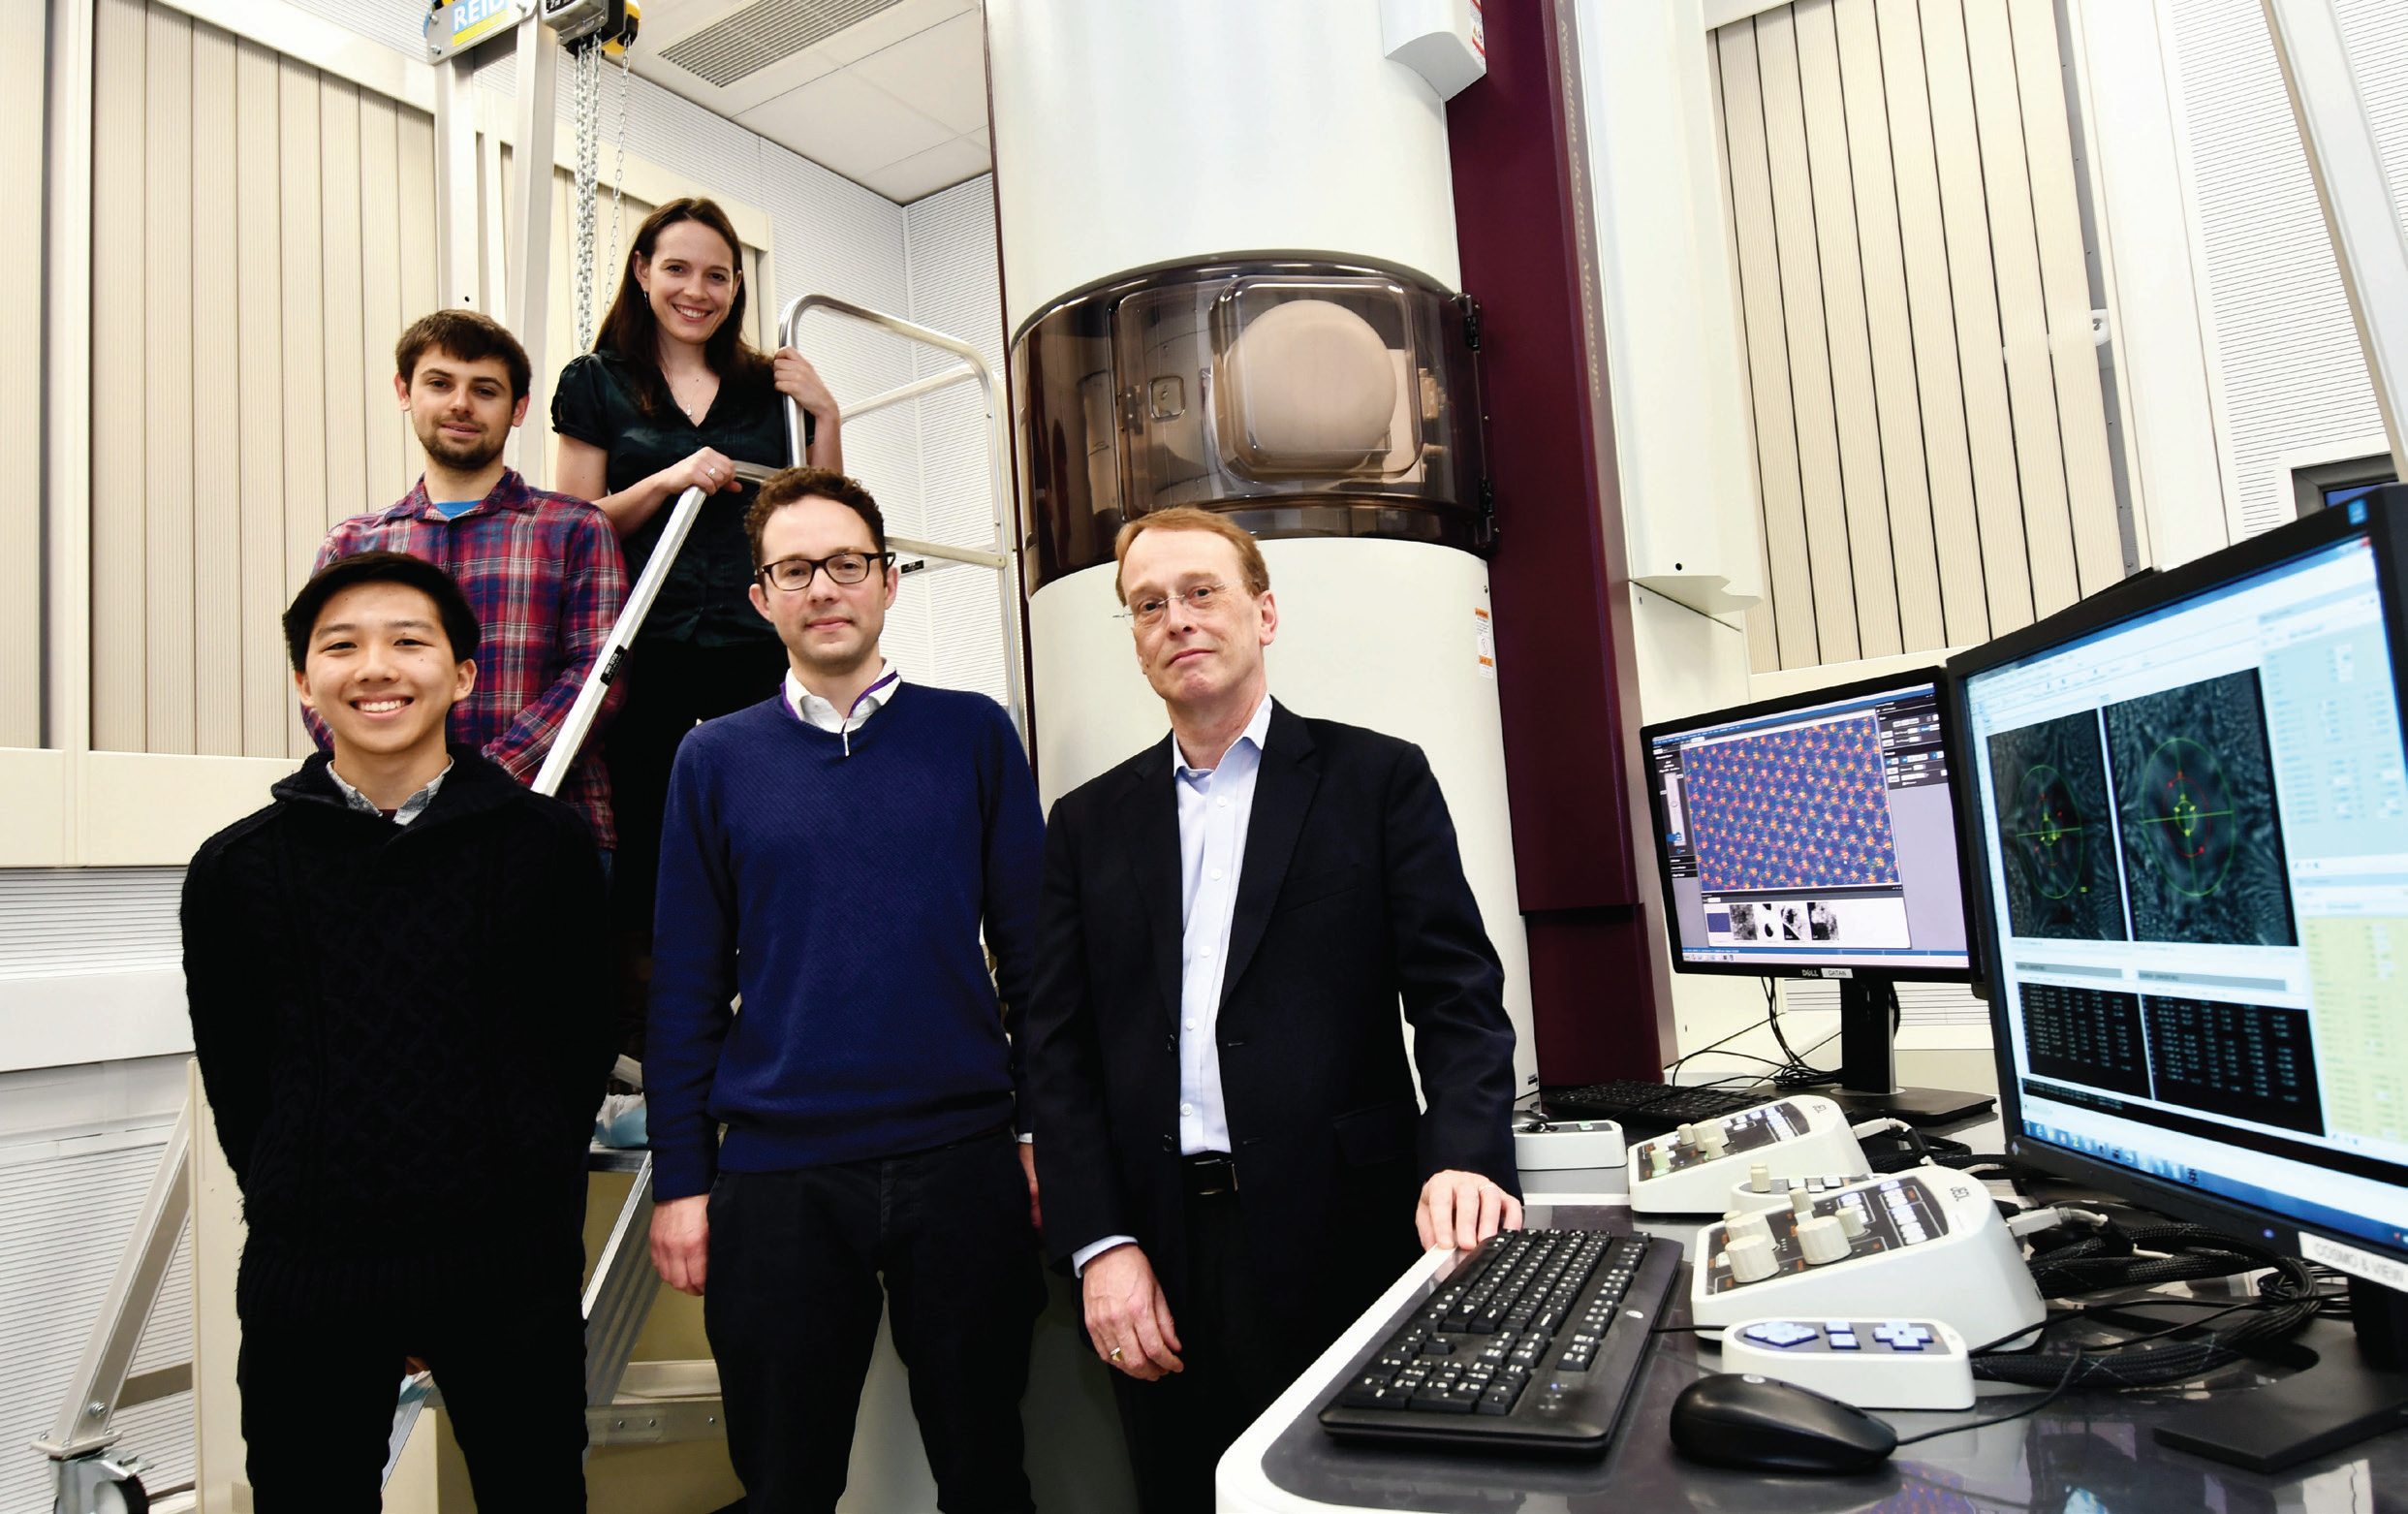 ePSIC first users from the National Graphene Institute at The University of Manchester, left to right: Lan Nguyen, Aidan Rooney, Sarah Haigh, Manchester, with Christopher Allen and Angus Kirkland, Oxford.